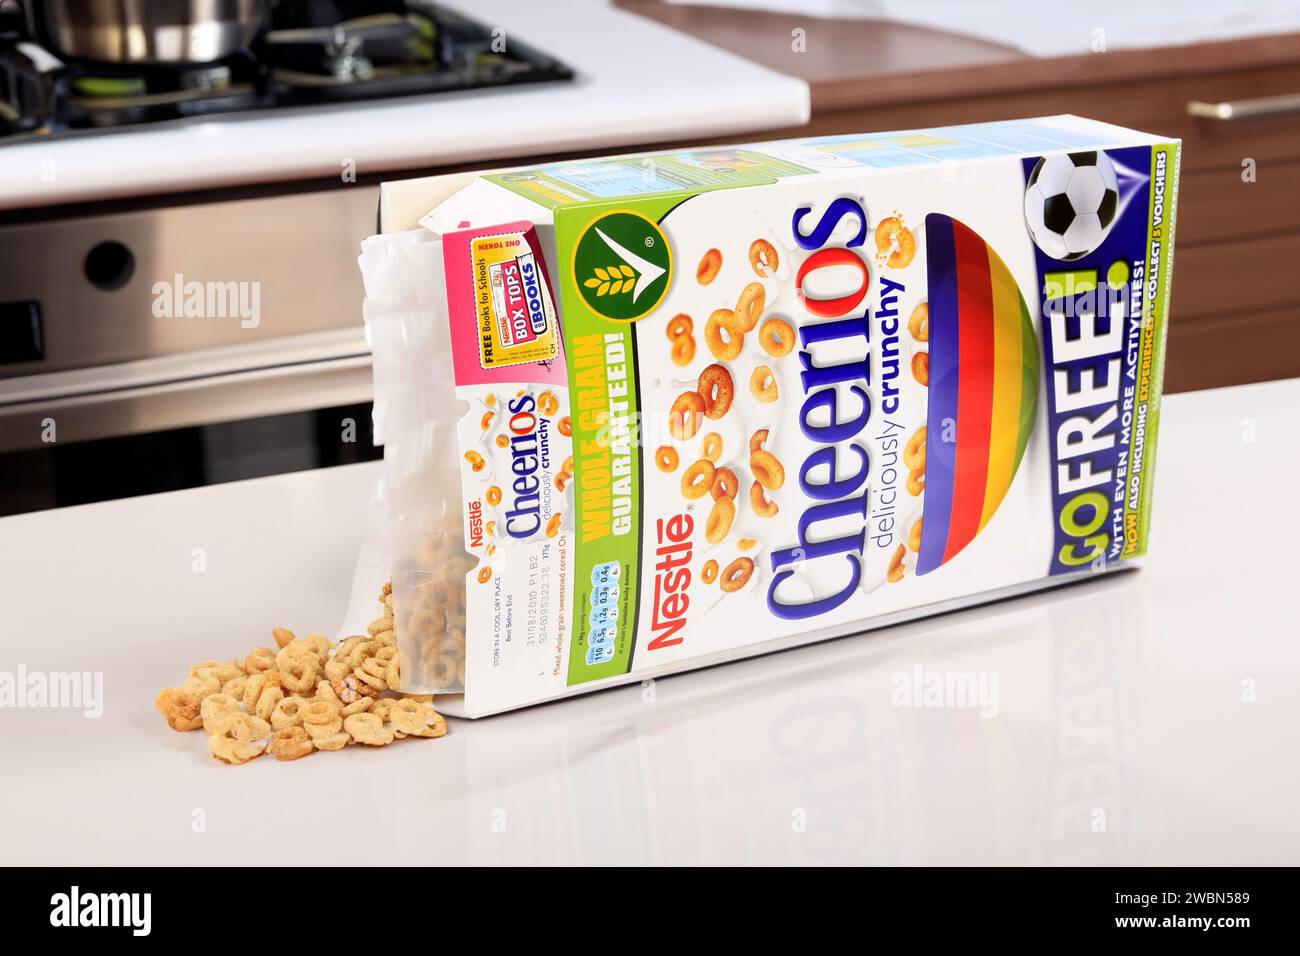 A white cut-out of a box of Cheerios Breakfast Cereals Stock Photo